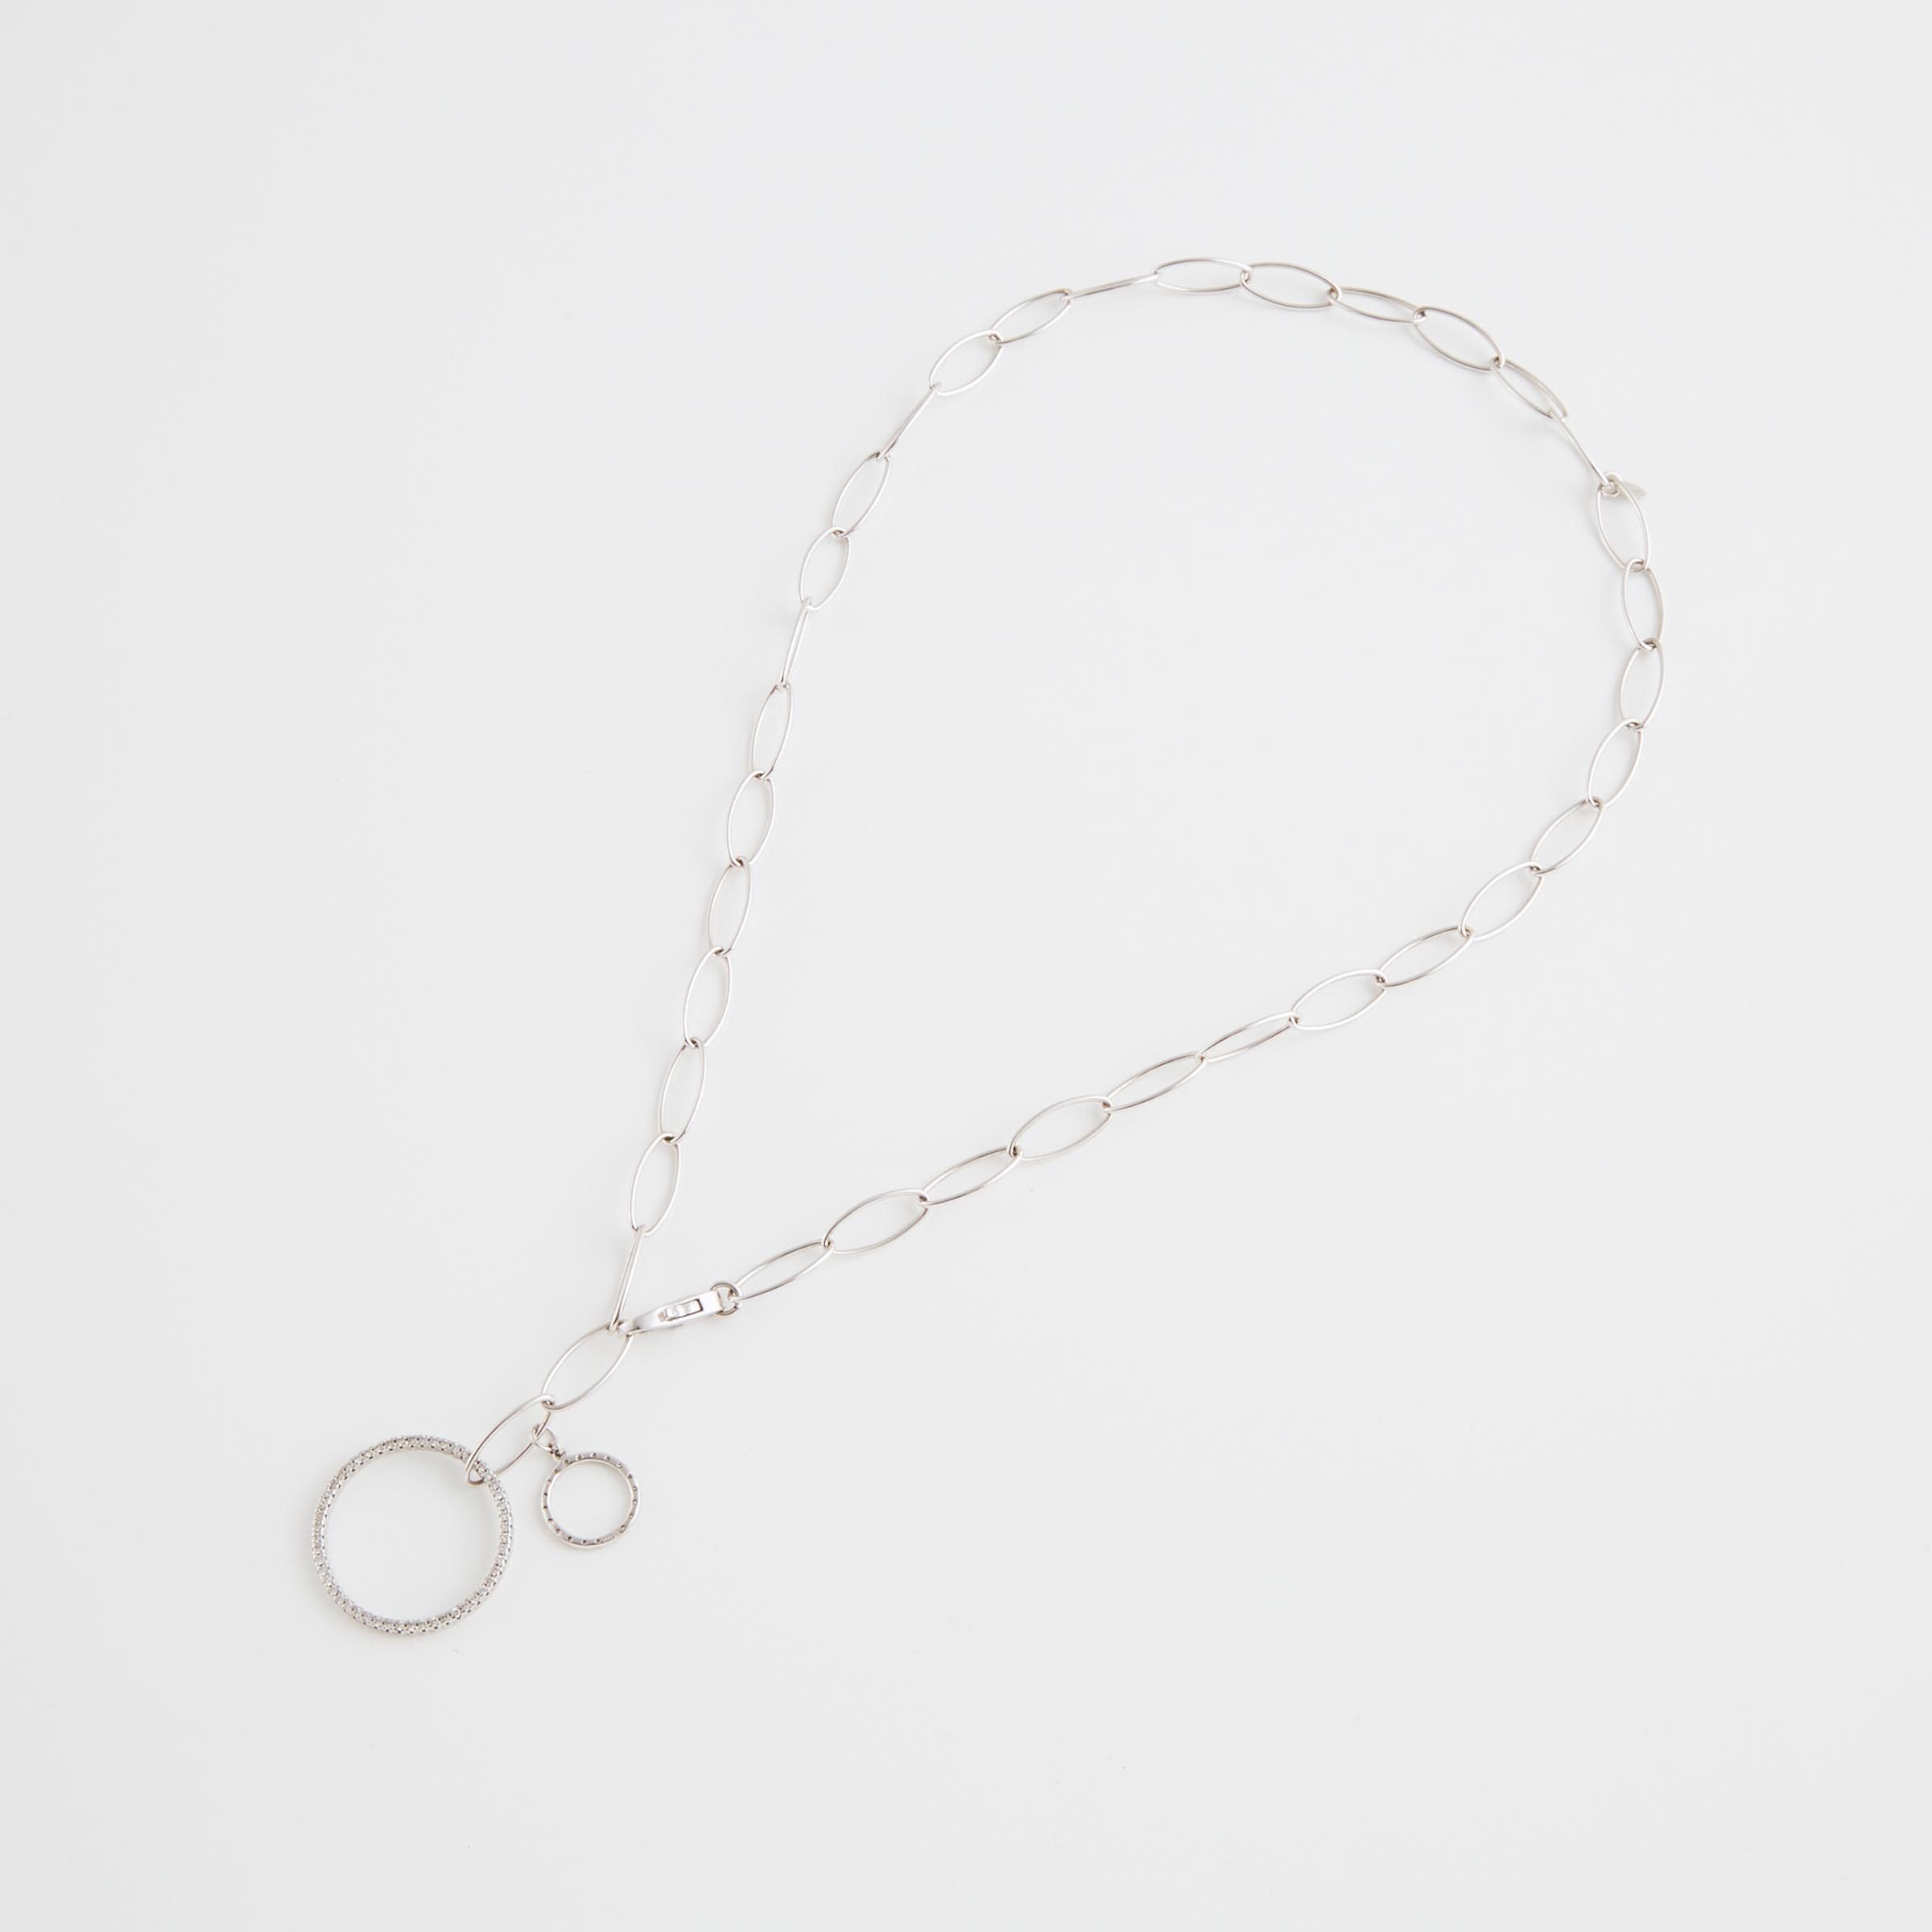 14k White Gold Necklace